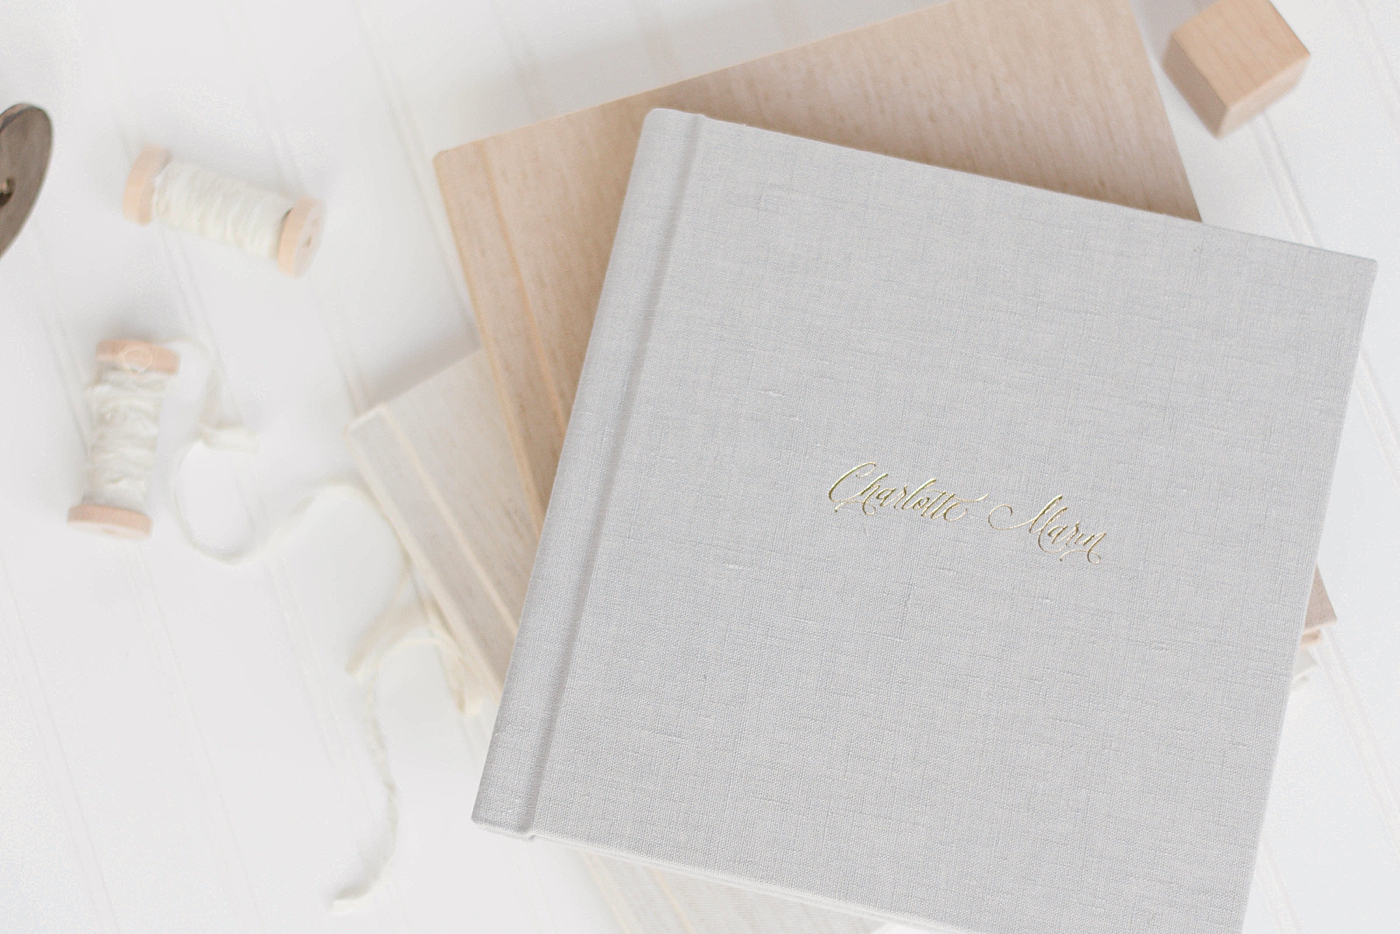 Handcrafted, linen albums | Fresh Light Photography